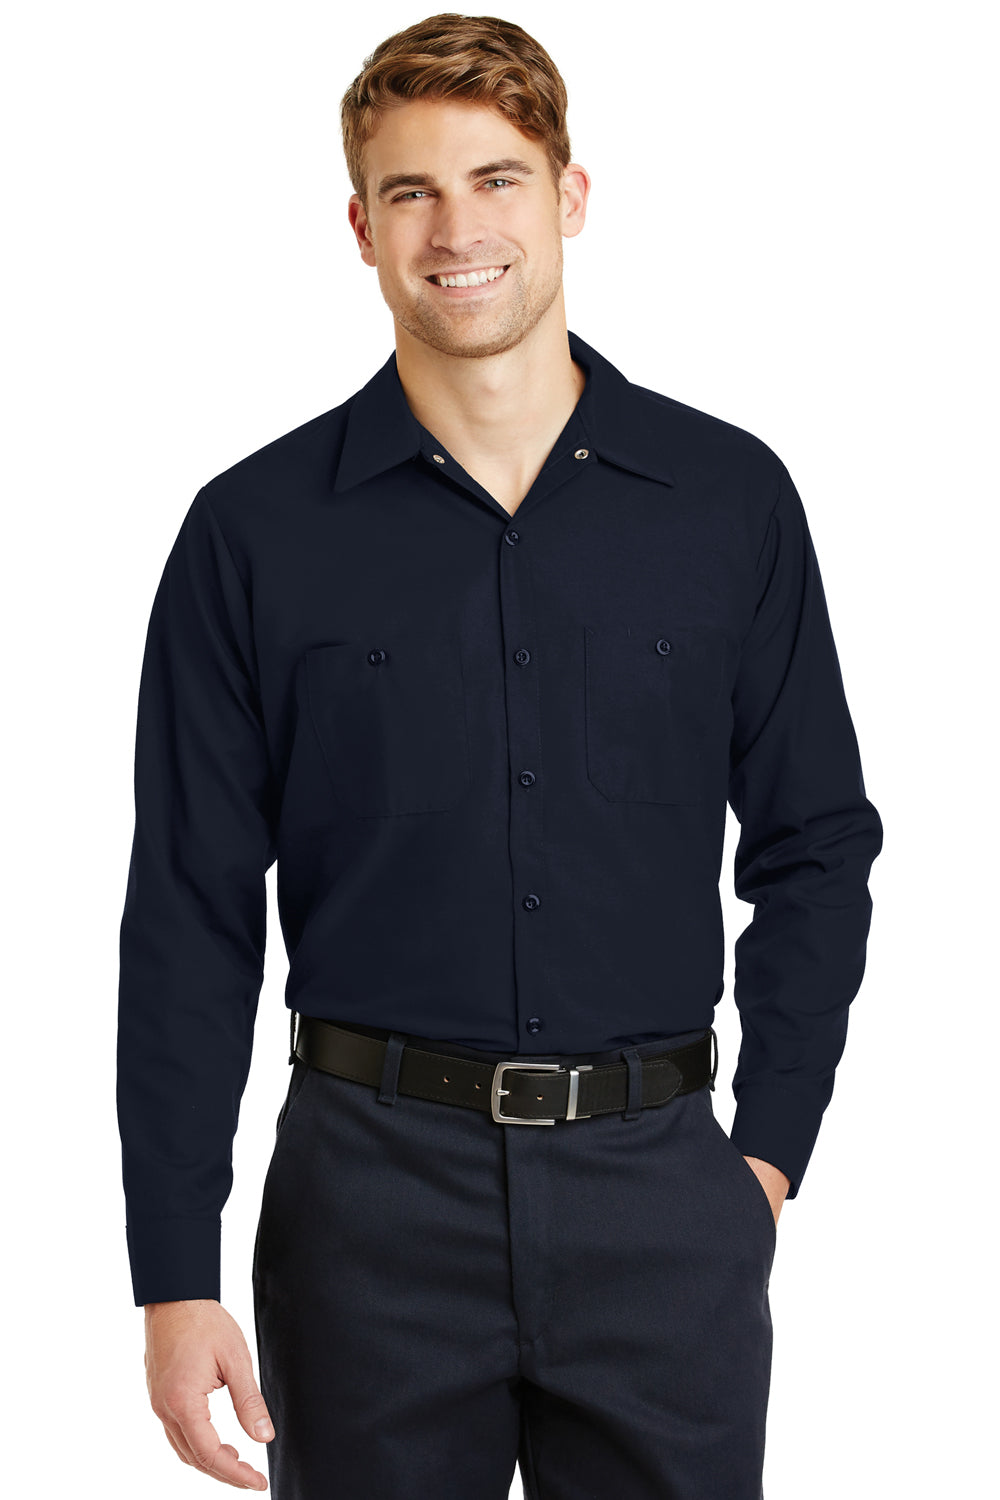 Red Kap SP14 Mens Industrial Moisture Wicking Long Sleeve Button Down Shirt w/ Double Pockets Navy Blue Front